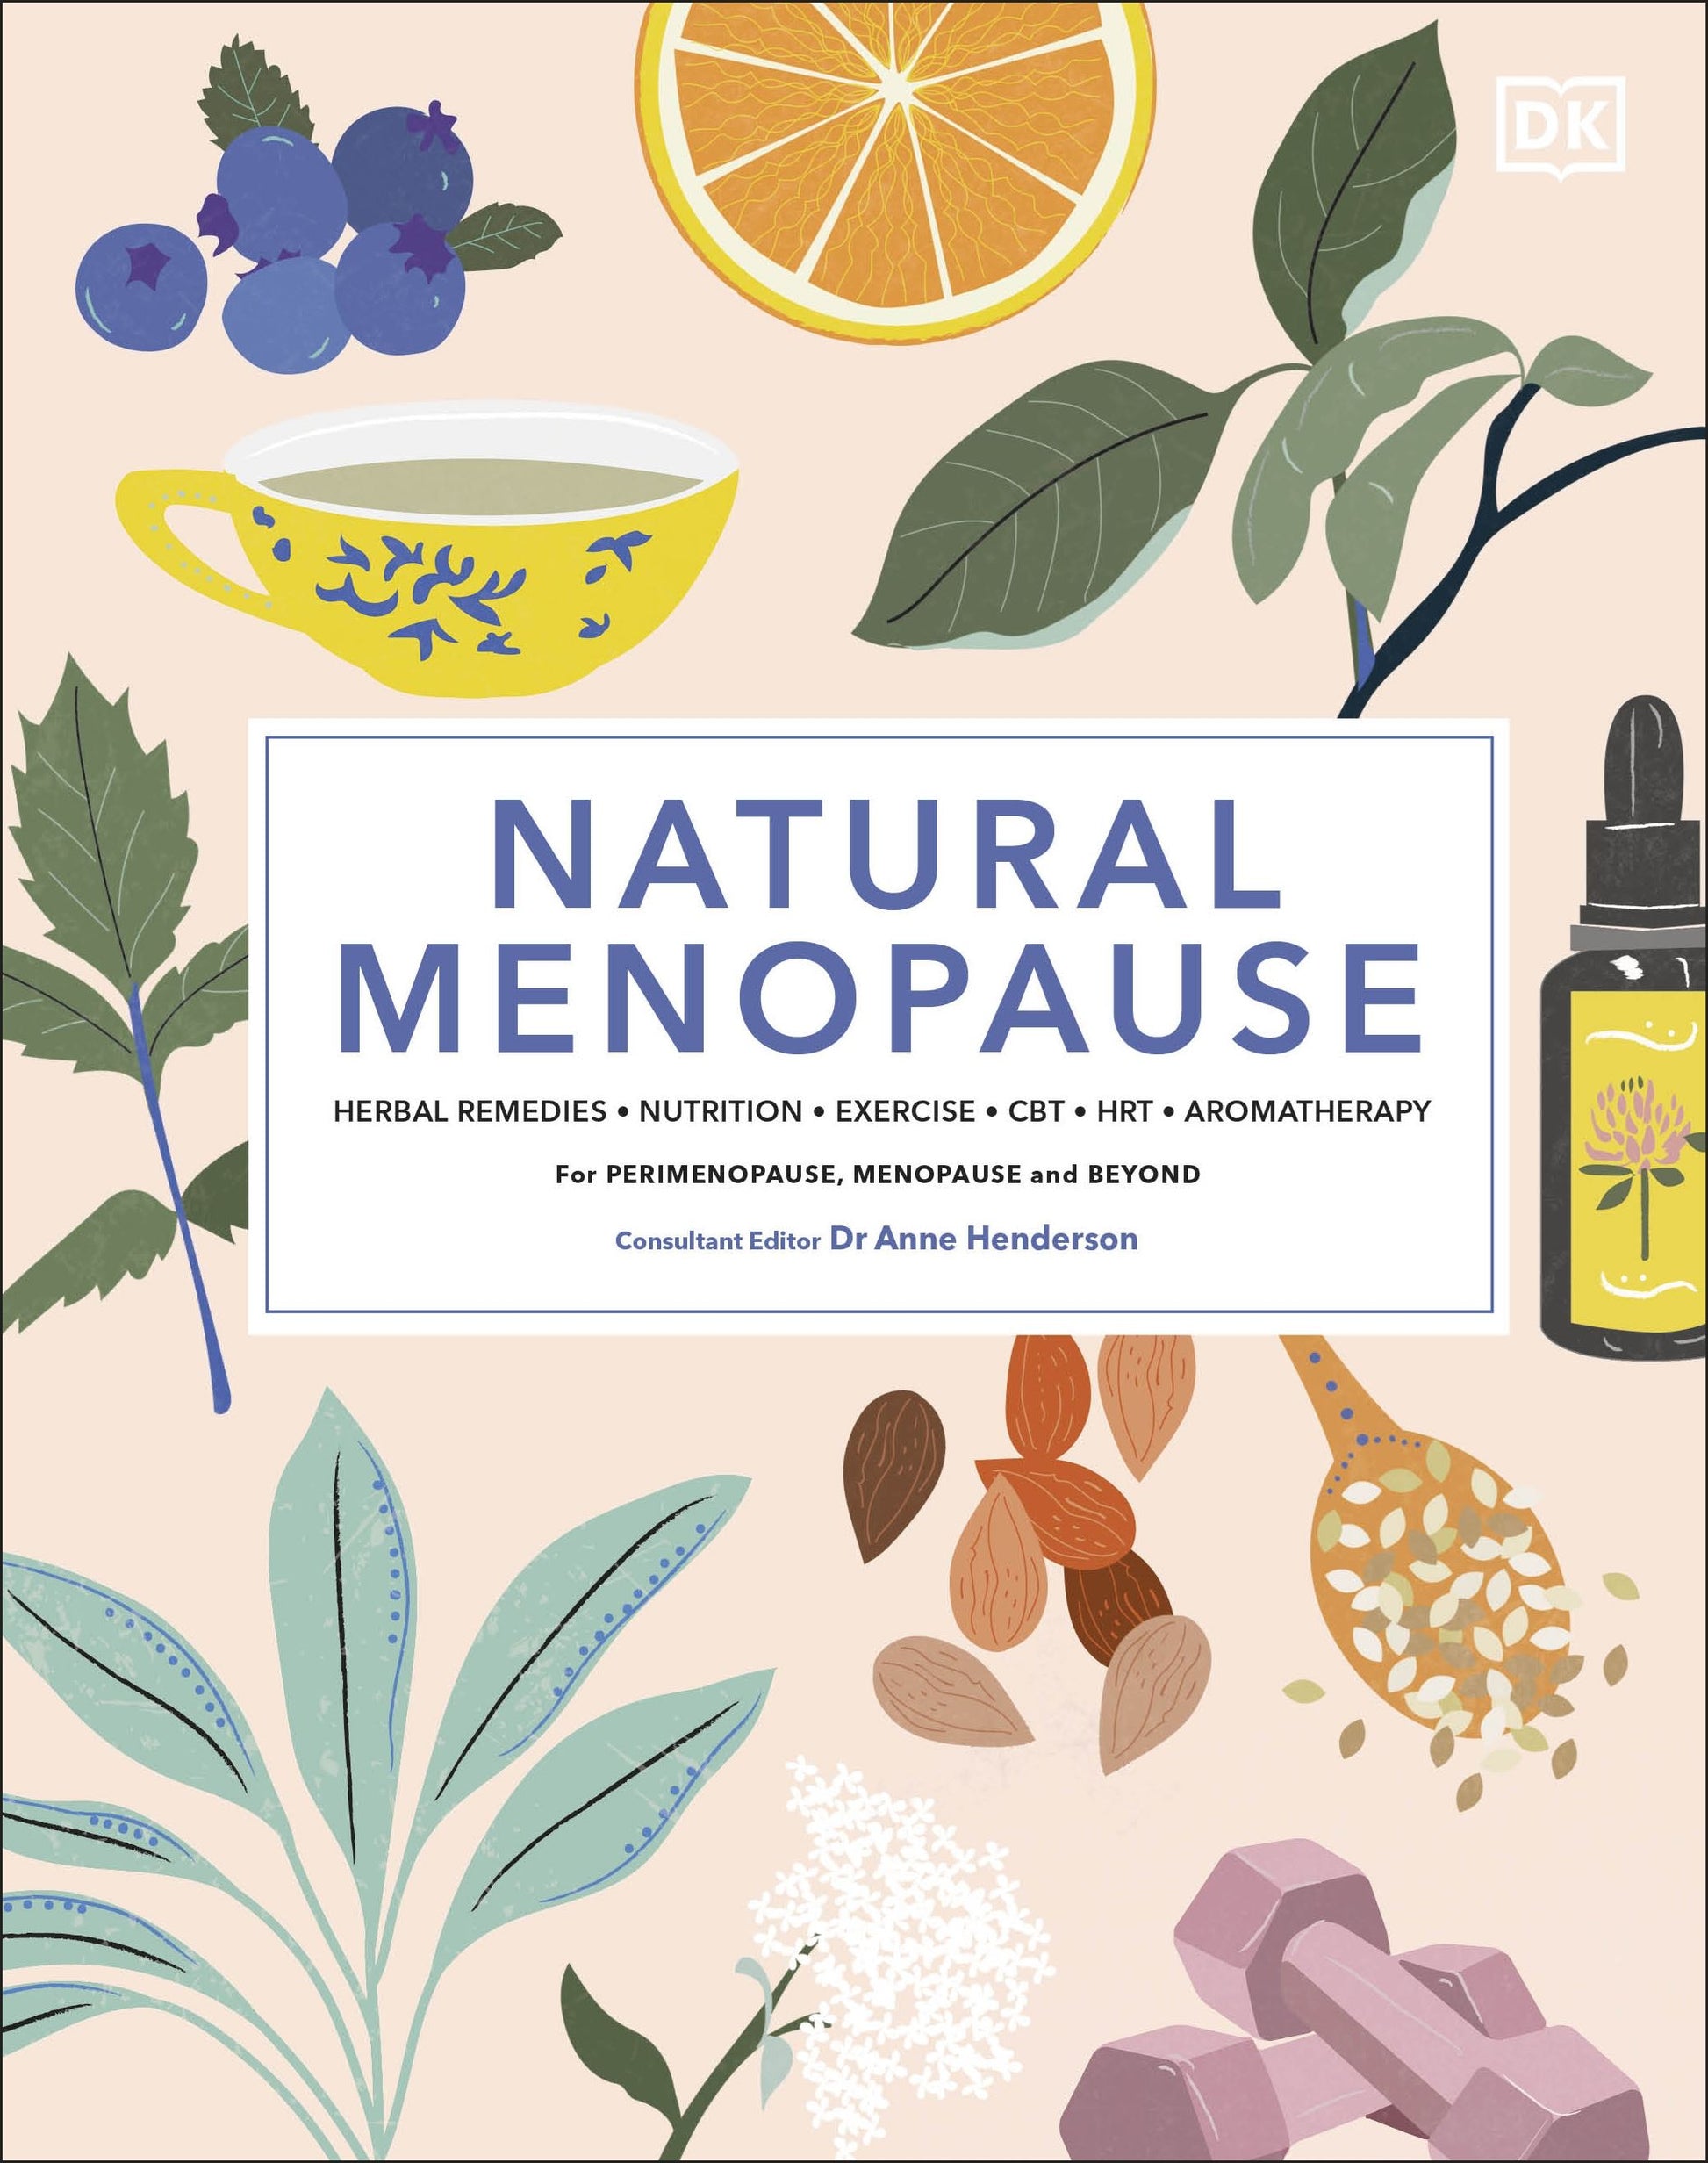 Understand the menopause with all its changes and learn about practices and treatments from a team of experts, to make this next stage in your wellness journey 